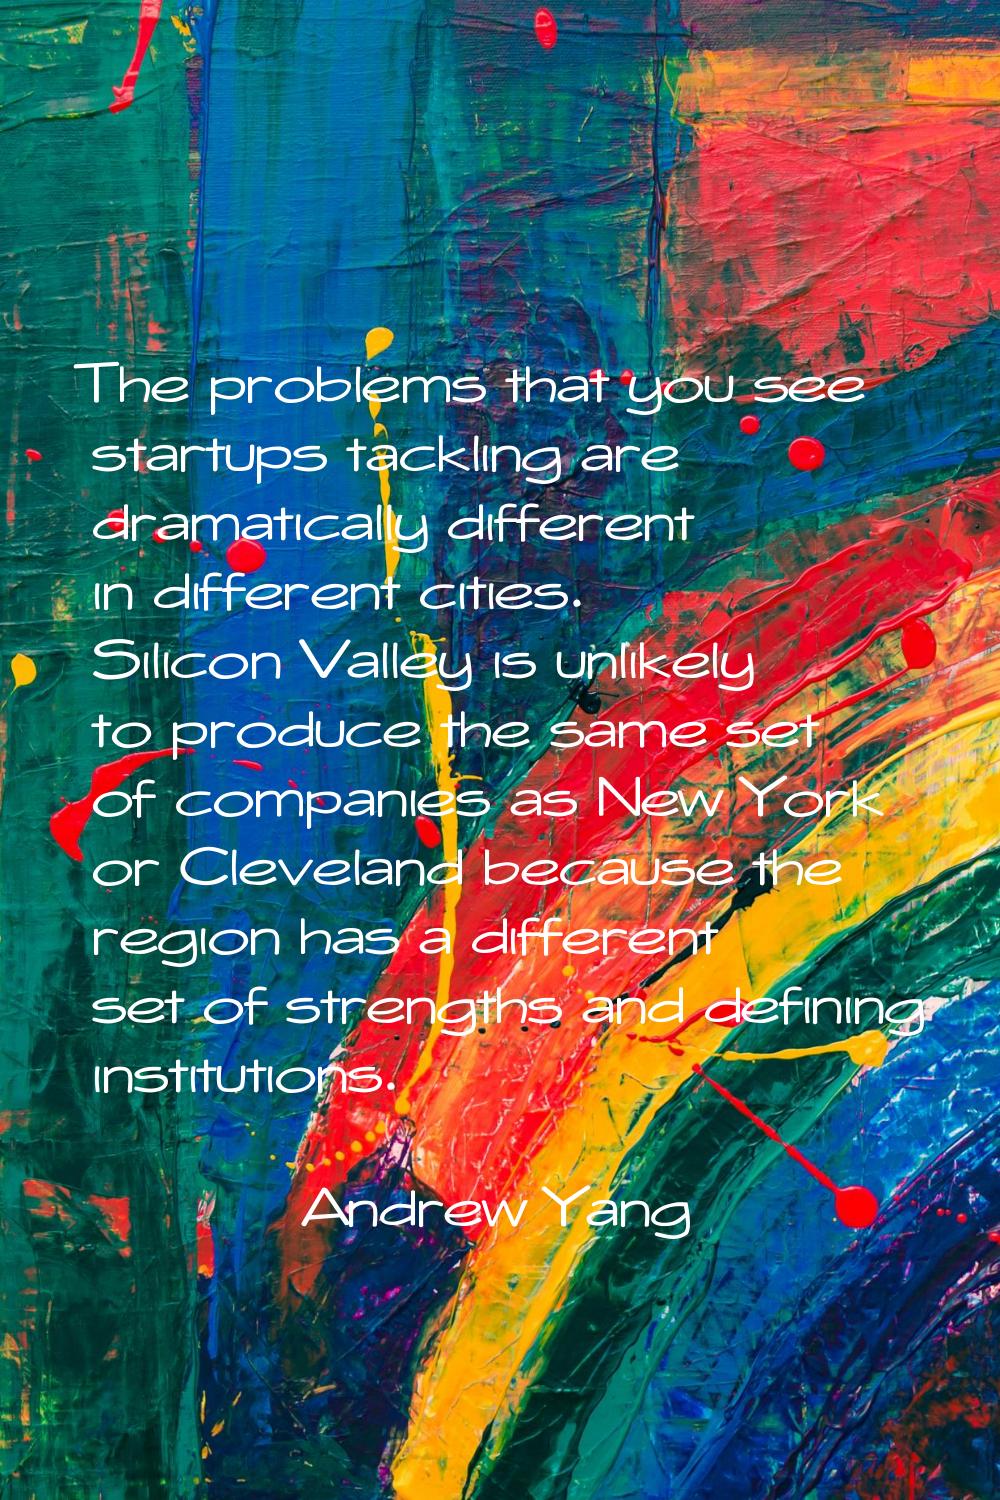 The problems that you see startups tackling are dramatically different in different cities. Silicon